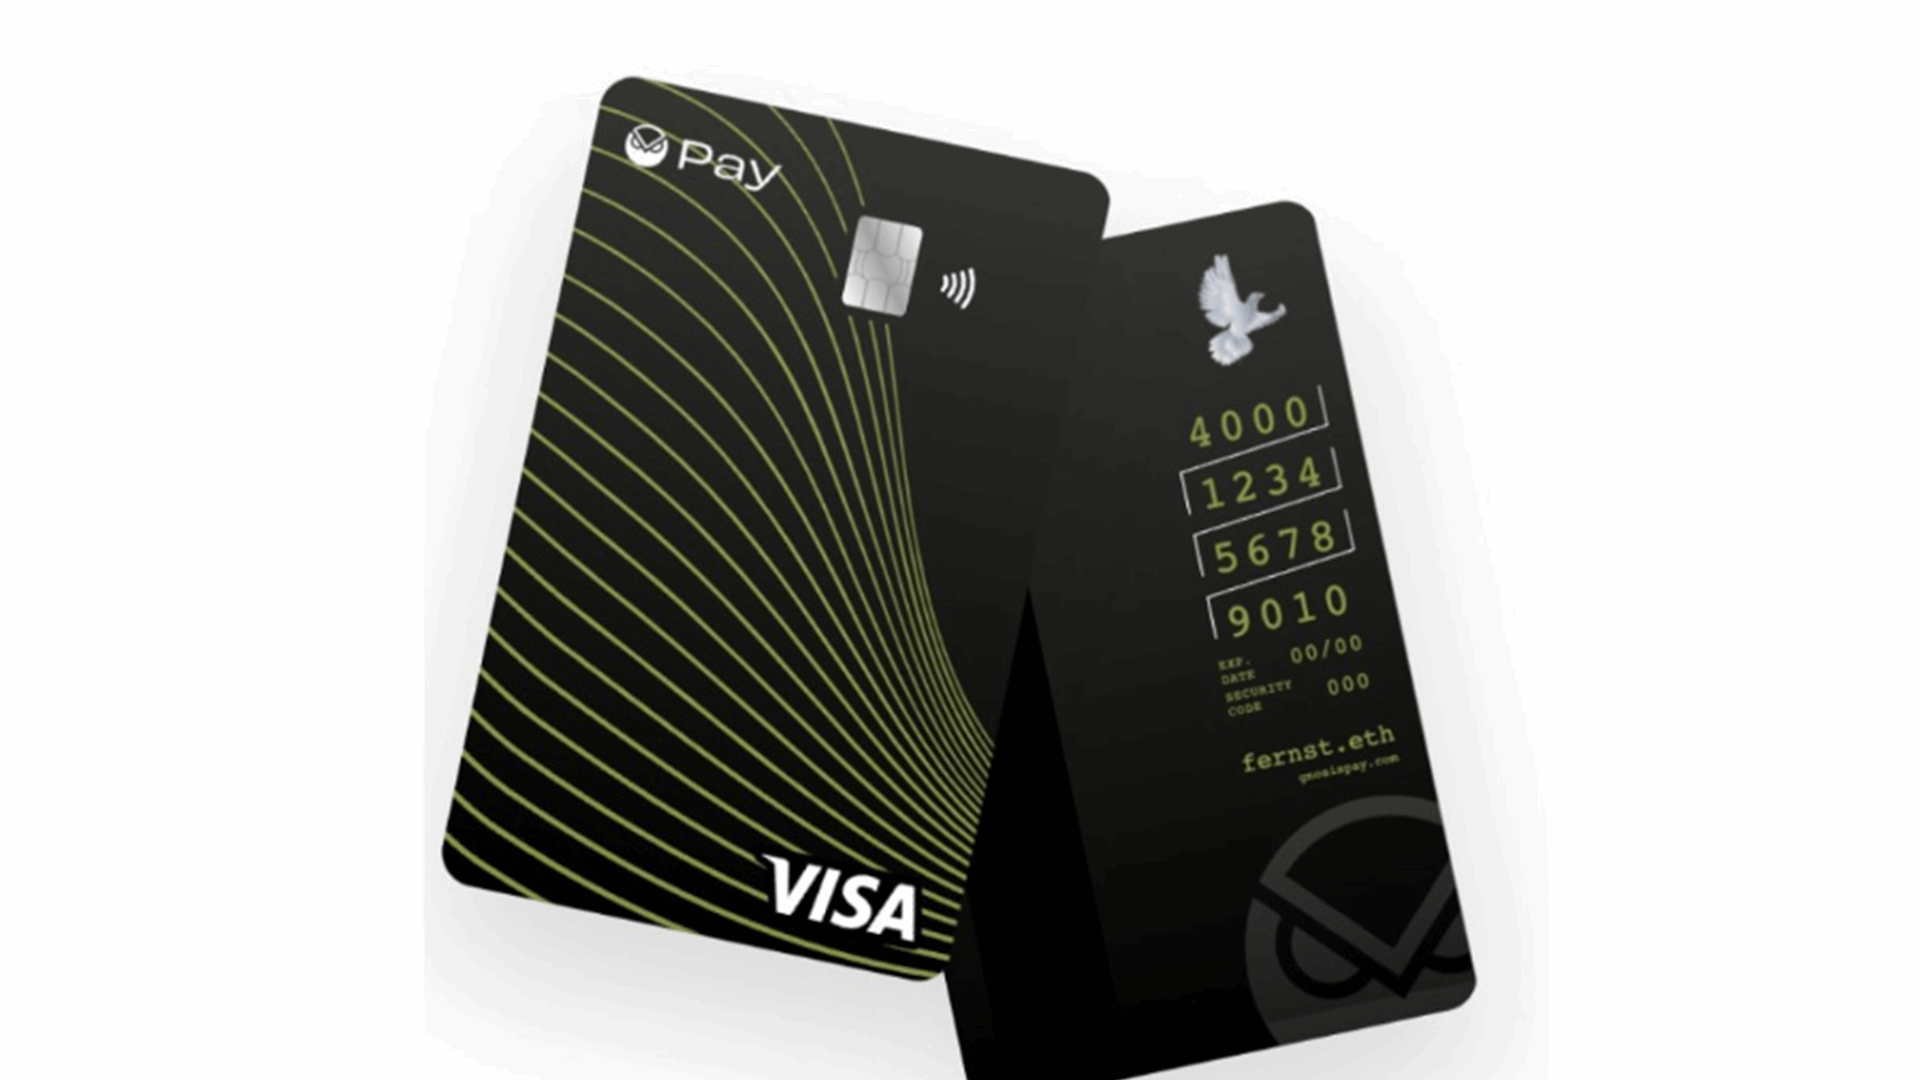 Gnosis launches Visa card that lets you spend self-custody crypto in Europe, soon US and Hong Kong